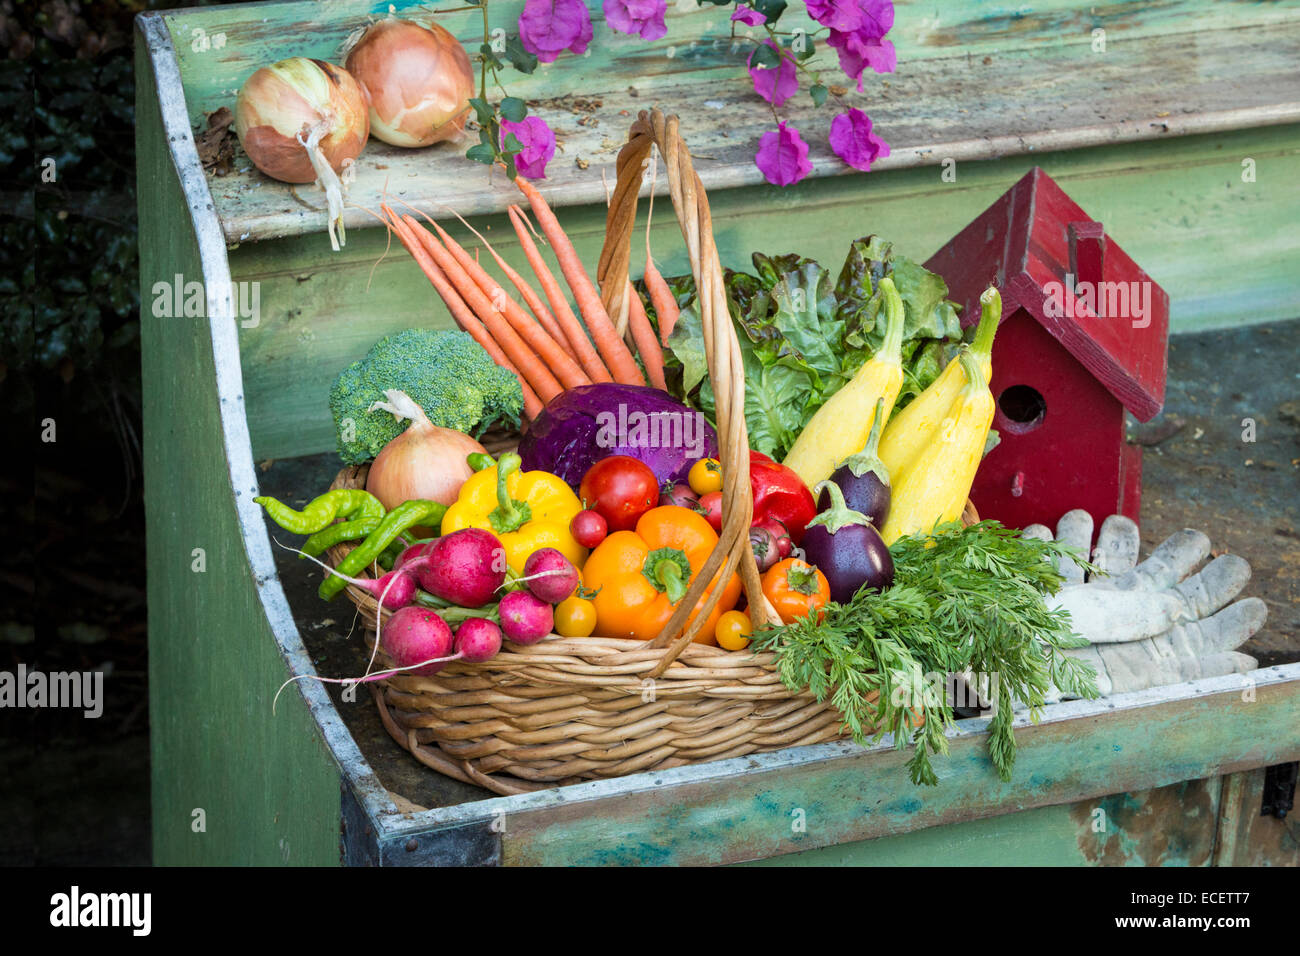 Fresh produce in a basket Stock Photo